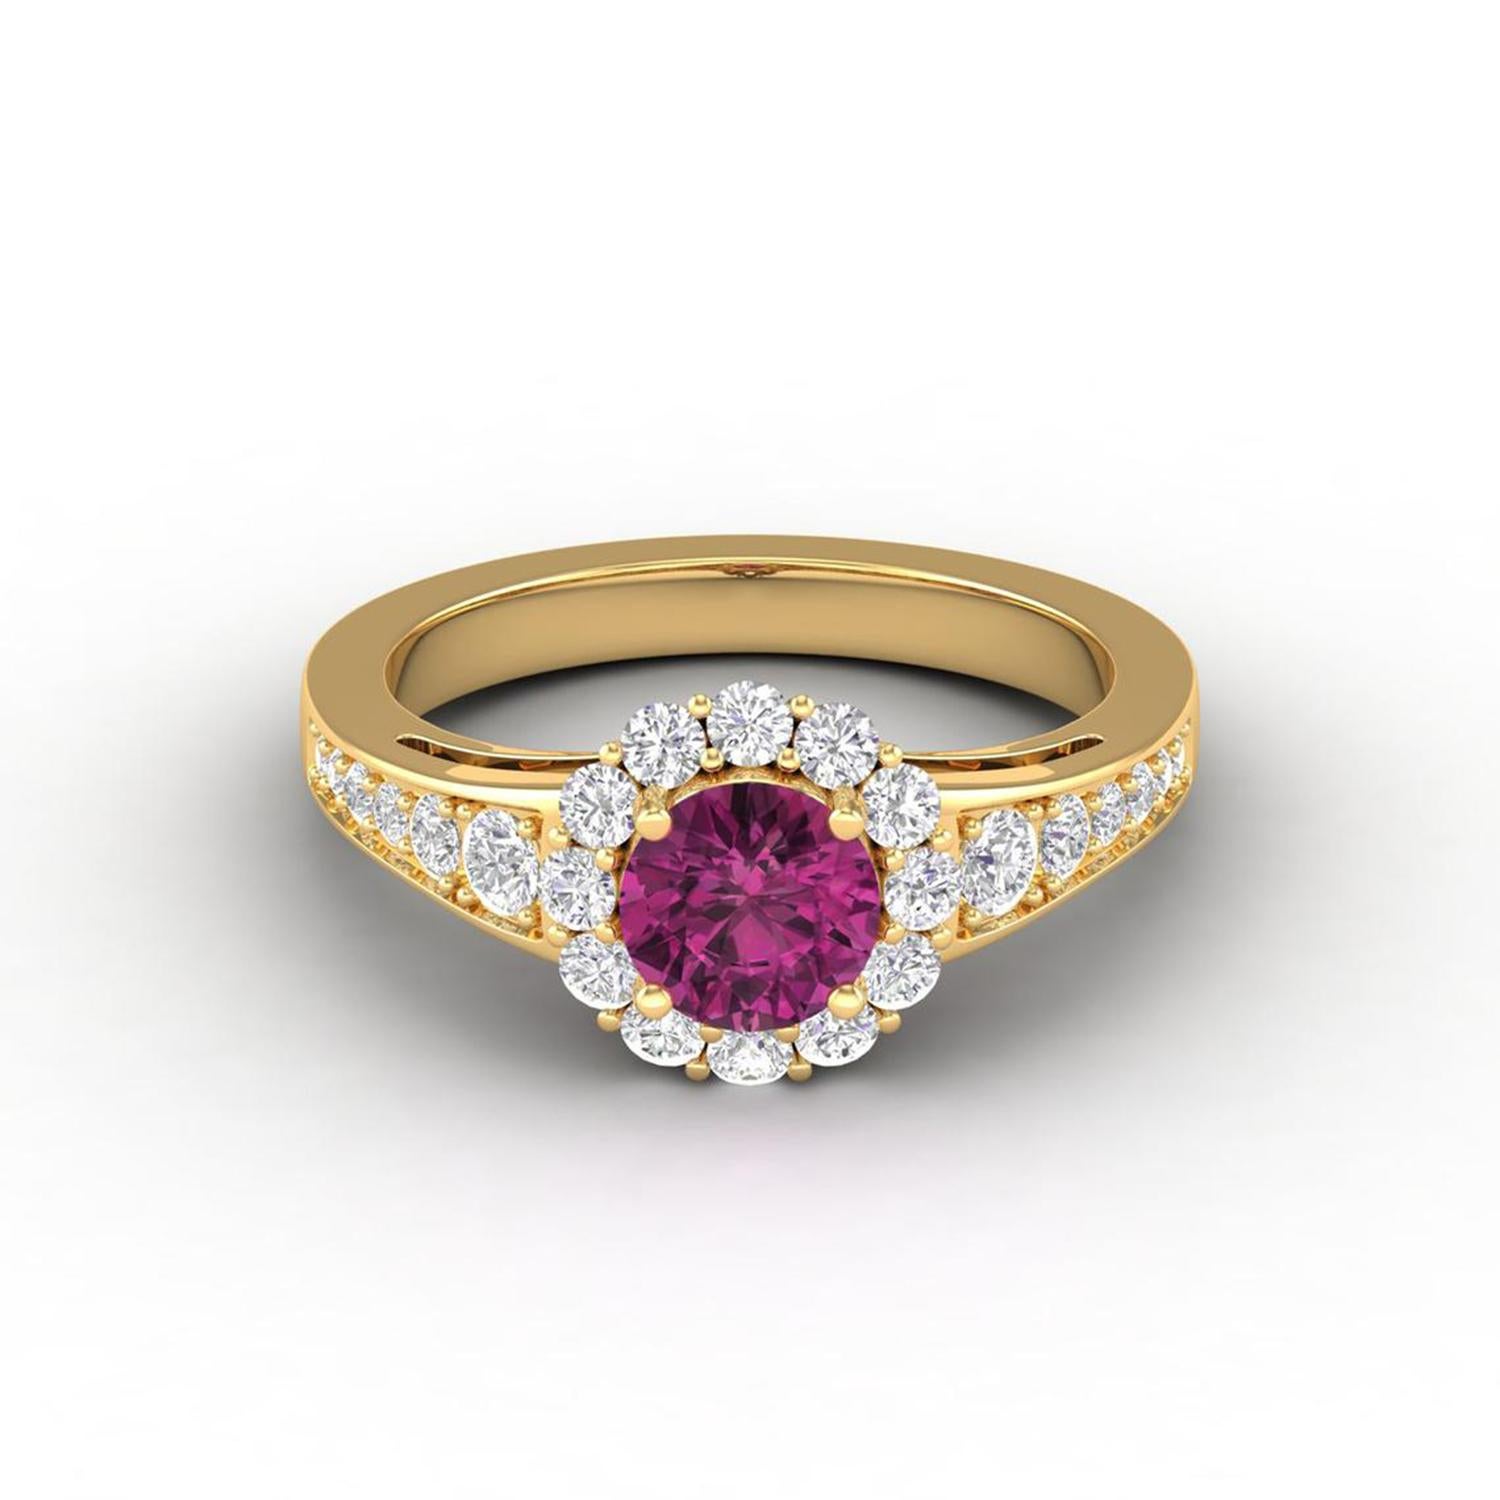 14 K Gold Rubellite Tourmaline Ring / Round Diamond Ring / Solitaire Ring For Sale 1